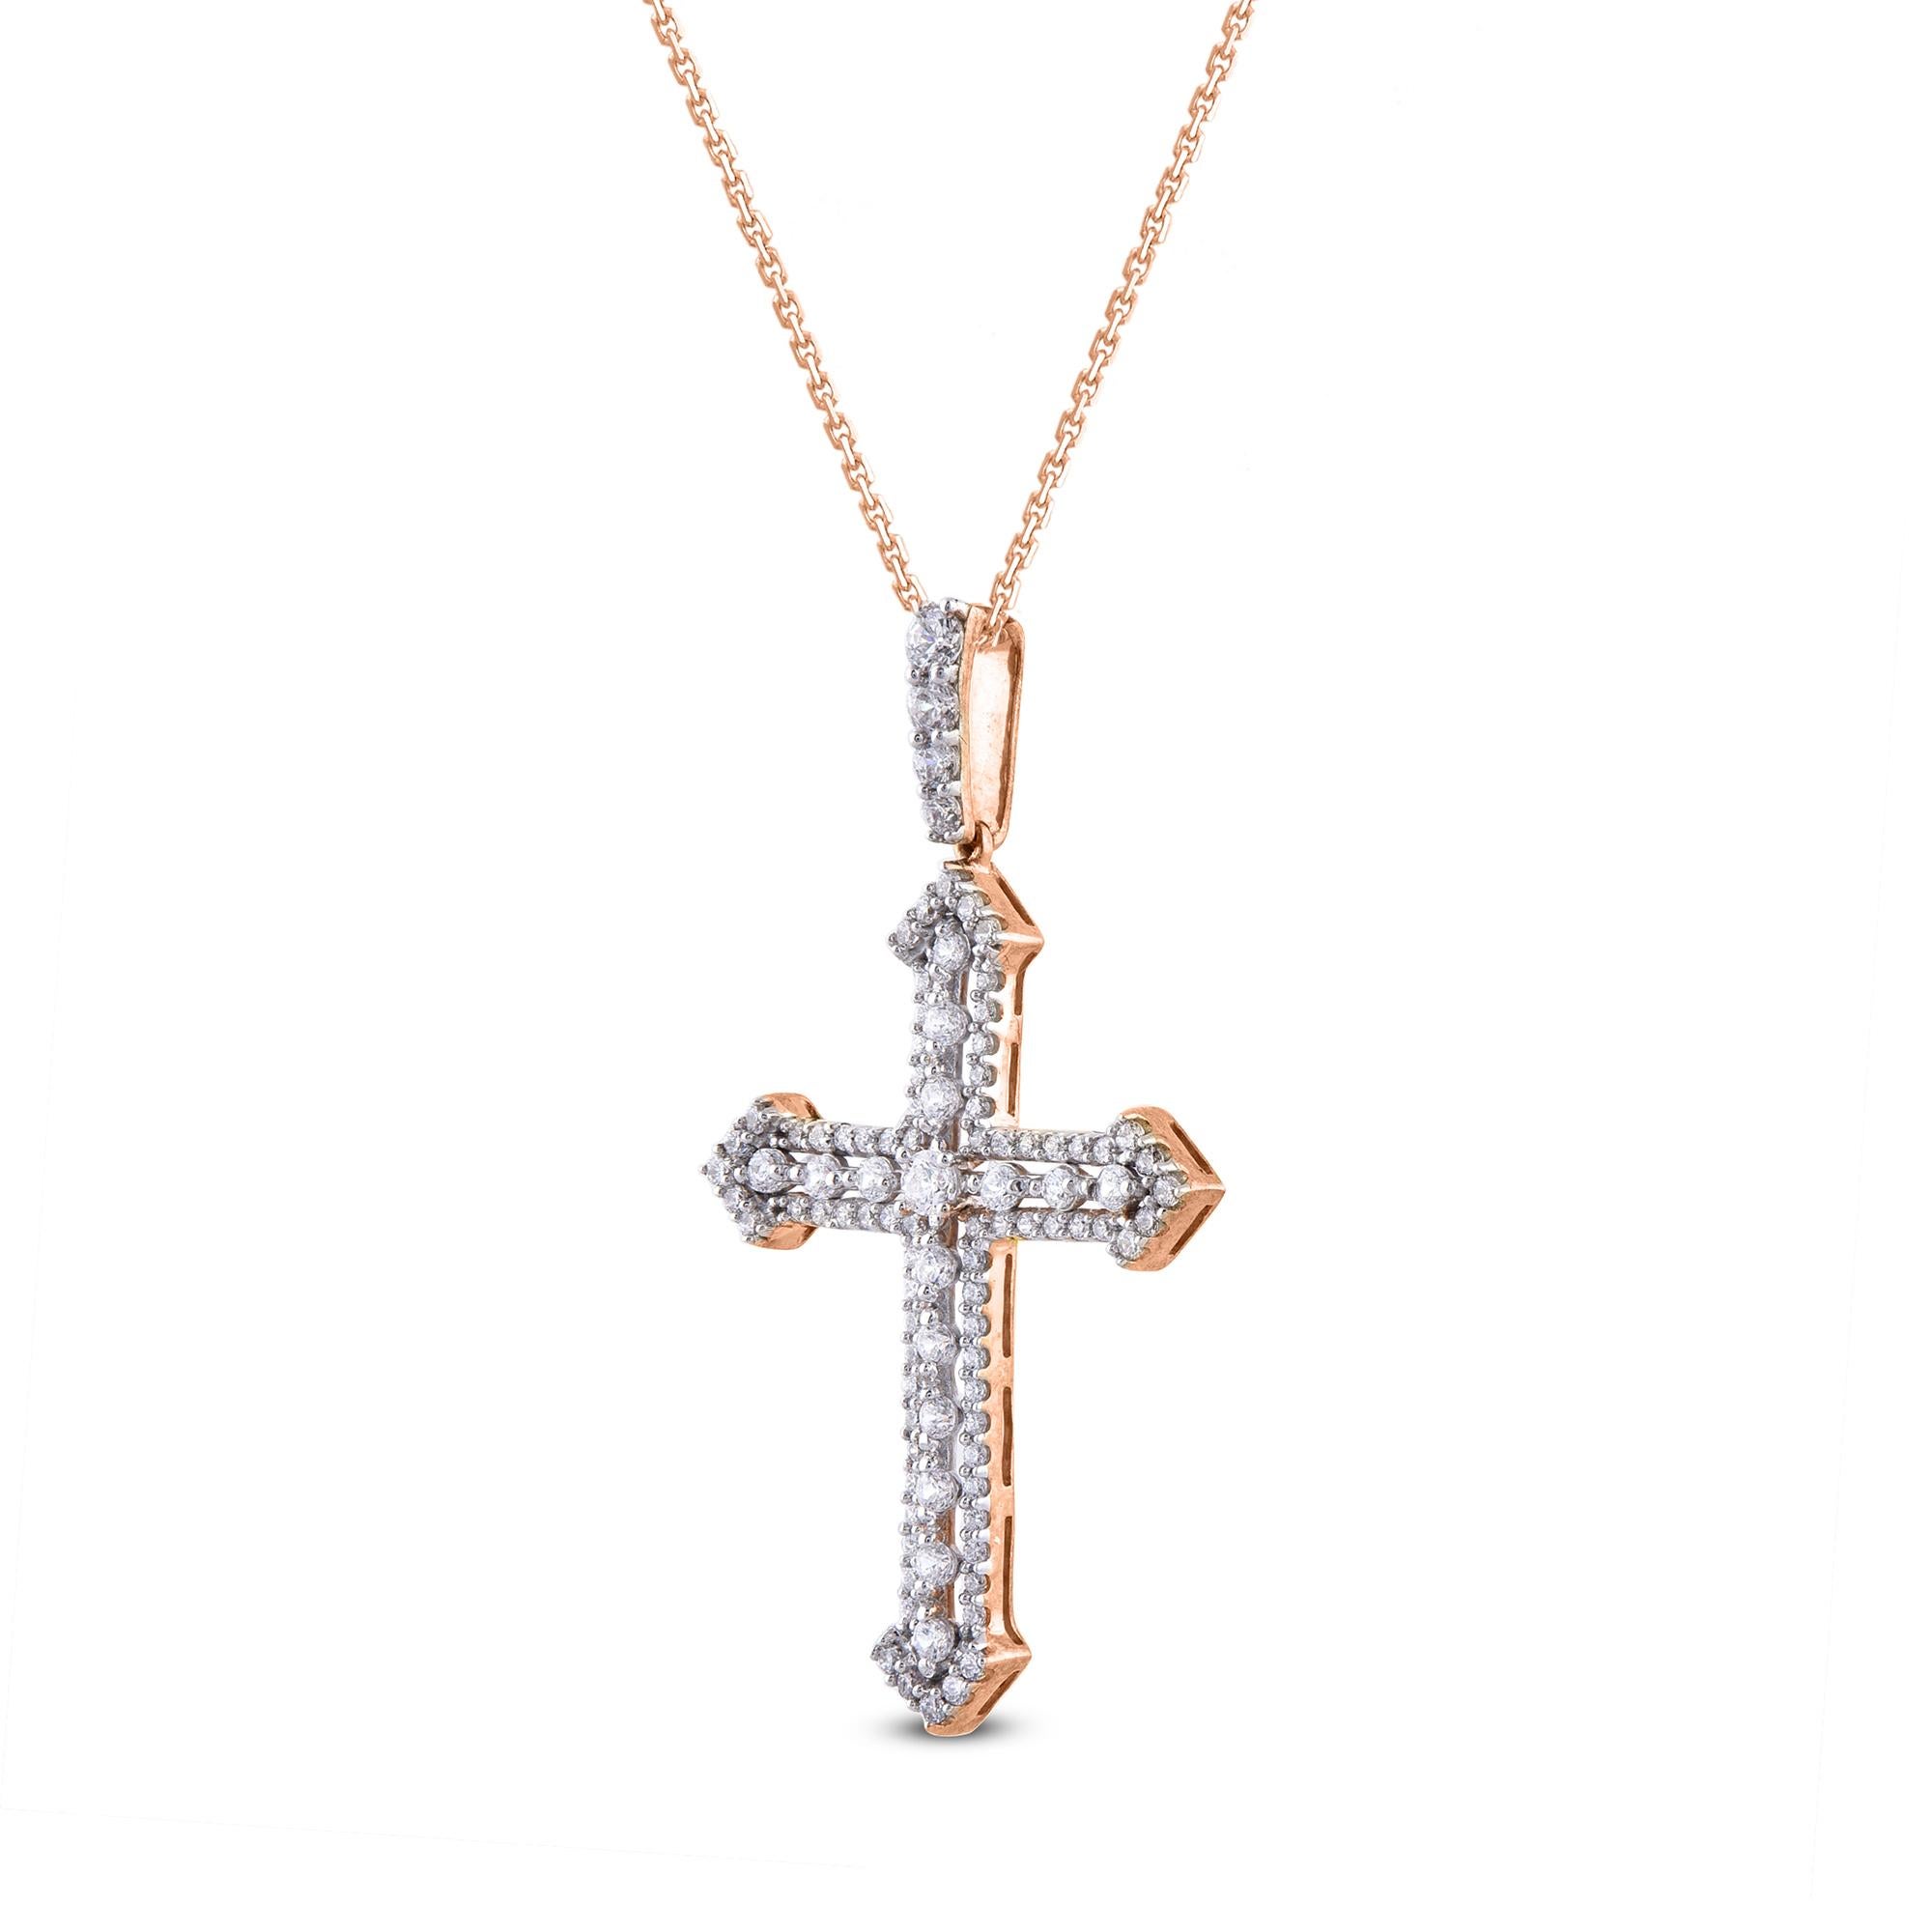 Let your faith shine with this simple and elegant cross pendant. The pendant is crafted from 14 karat gold in yellow gold and features 98 round natural diamond set in Prong setting. A high polish finish complete the Brilliant sophistication of this